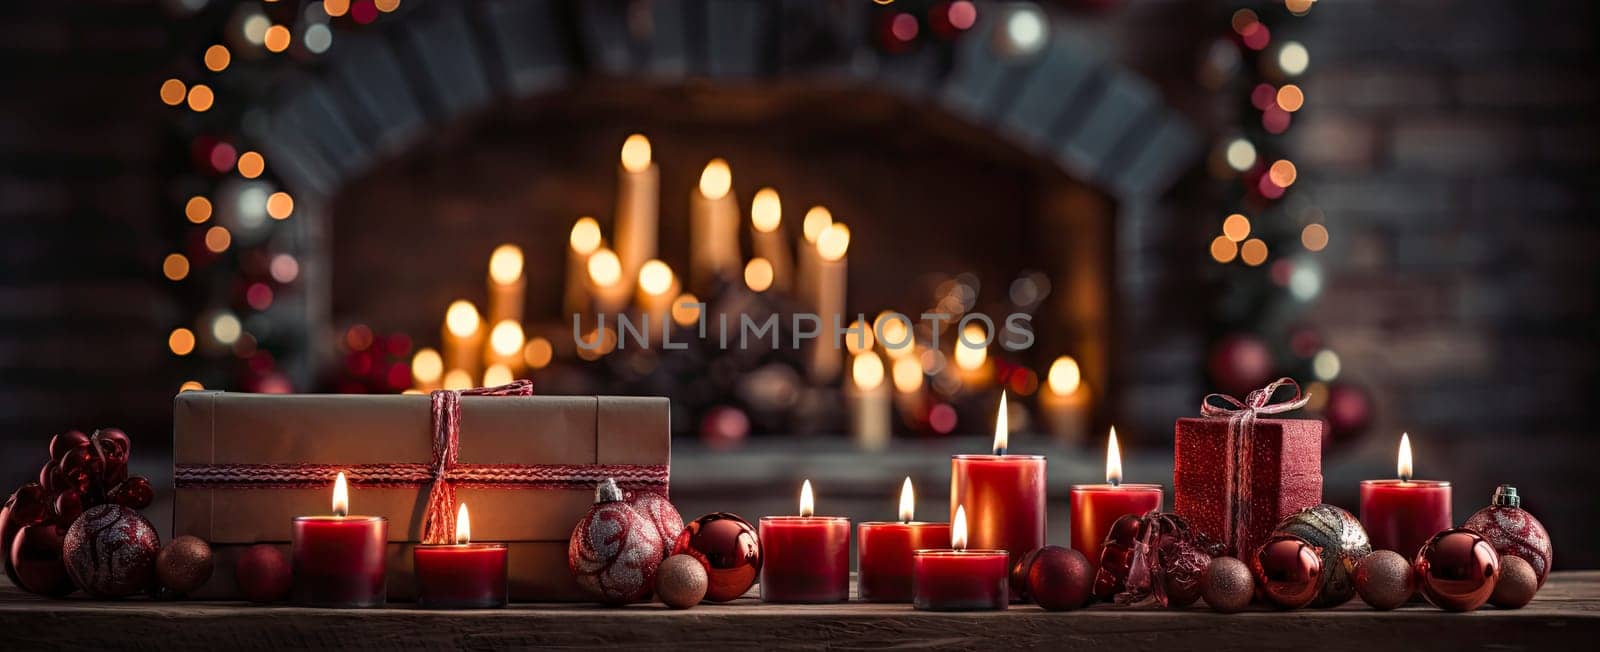 Decorated xmas table with Merry Christmas gifts in cozy Santa home interior, banner. Happy New Year presents boxes in workshop late in night with lights on xmas tree, holiday eve background. by jbruiz78